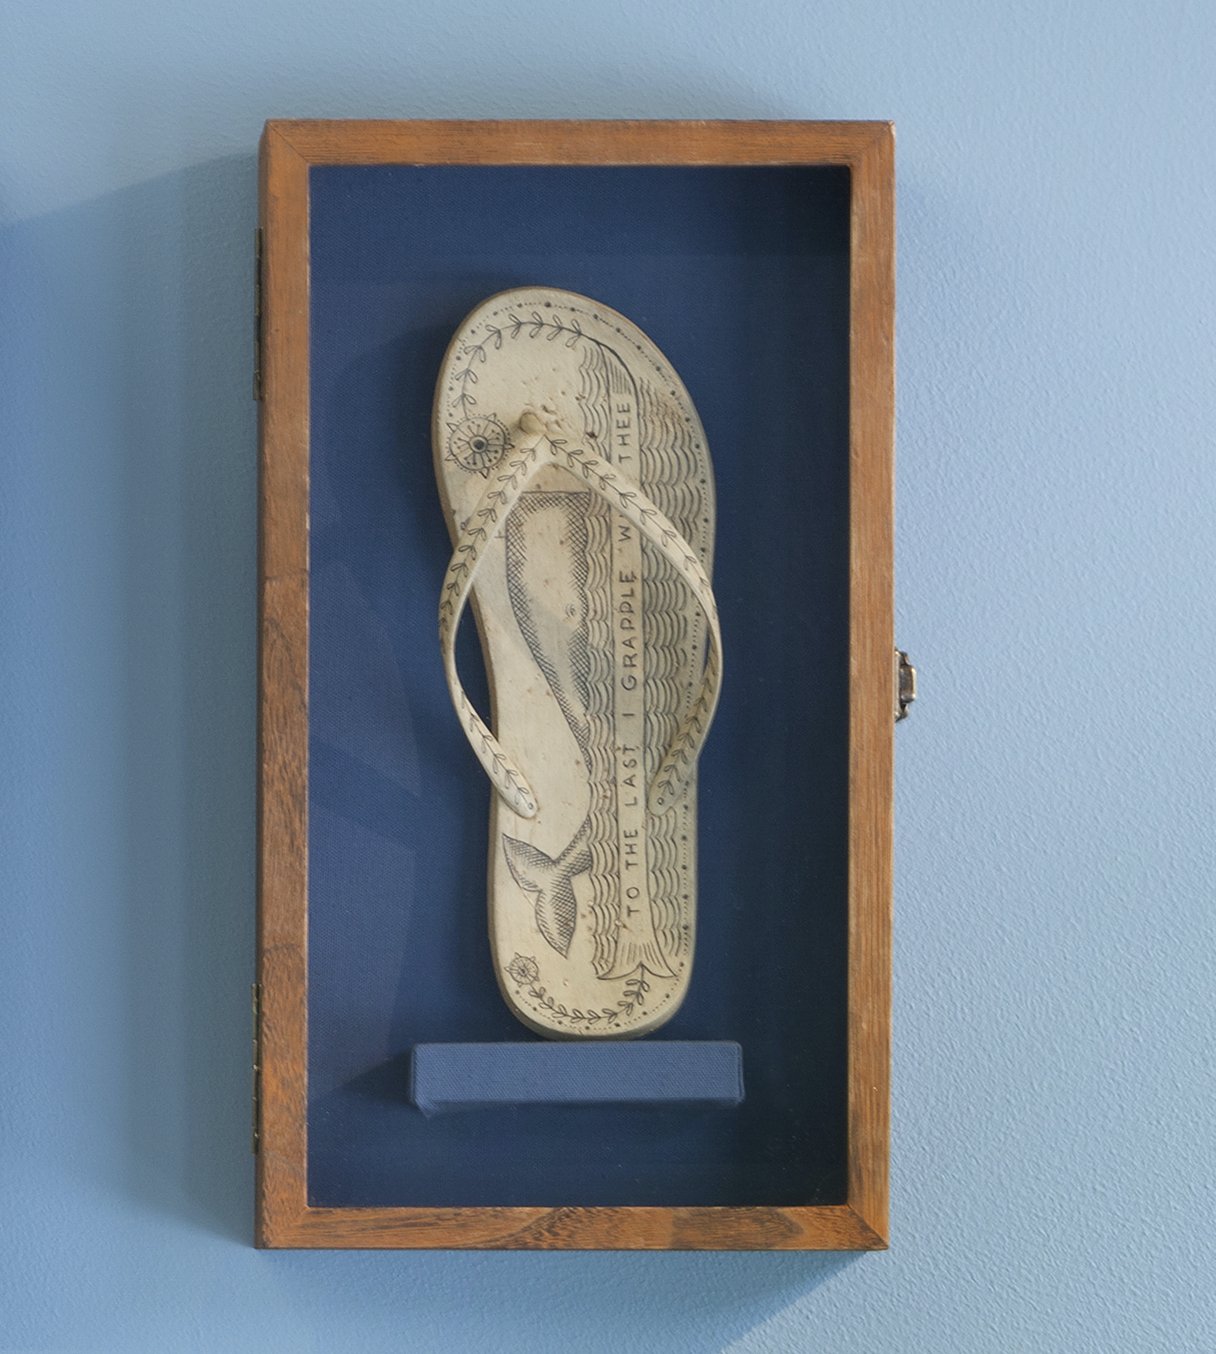   No. 227 of the Poly S. Tyrene Memorial Maritime Museum , 2020, Reclaimed ocean plastic, ink, wax in wood &amp; glass case, 14.88” x 8.5” x 2.75". Photo courtesy of Will Howcroft for Praise Shadows Art Gallery. 